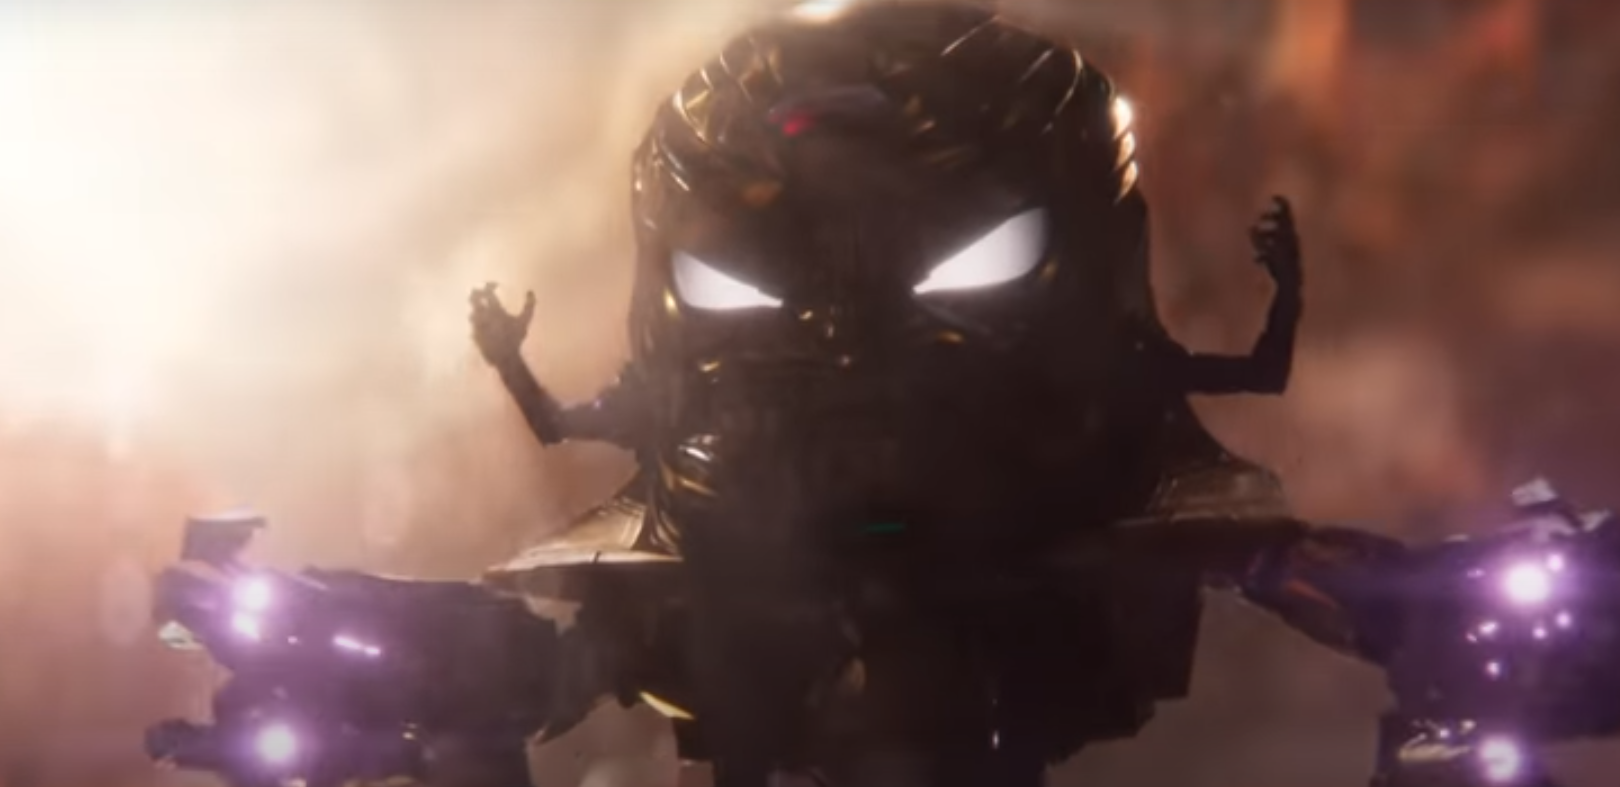 Spotted MODOK In the "Ant-Man and the Wasp: Quantamania" Trailer? If Yes, Here Know More About One of The Most Powerful Beings In the MCU